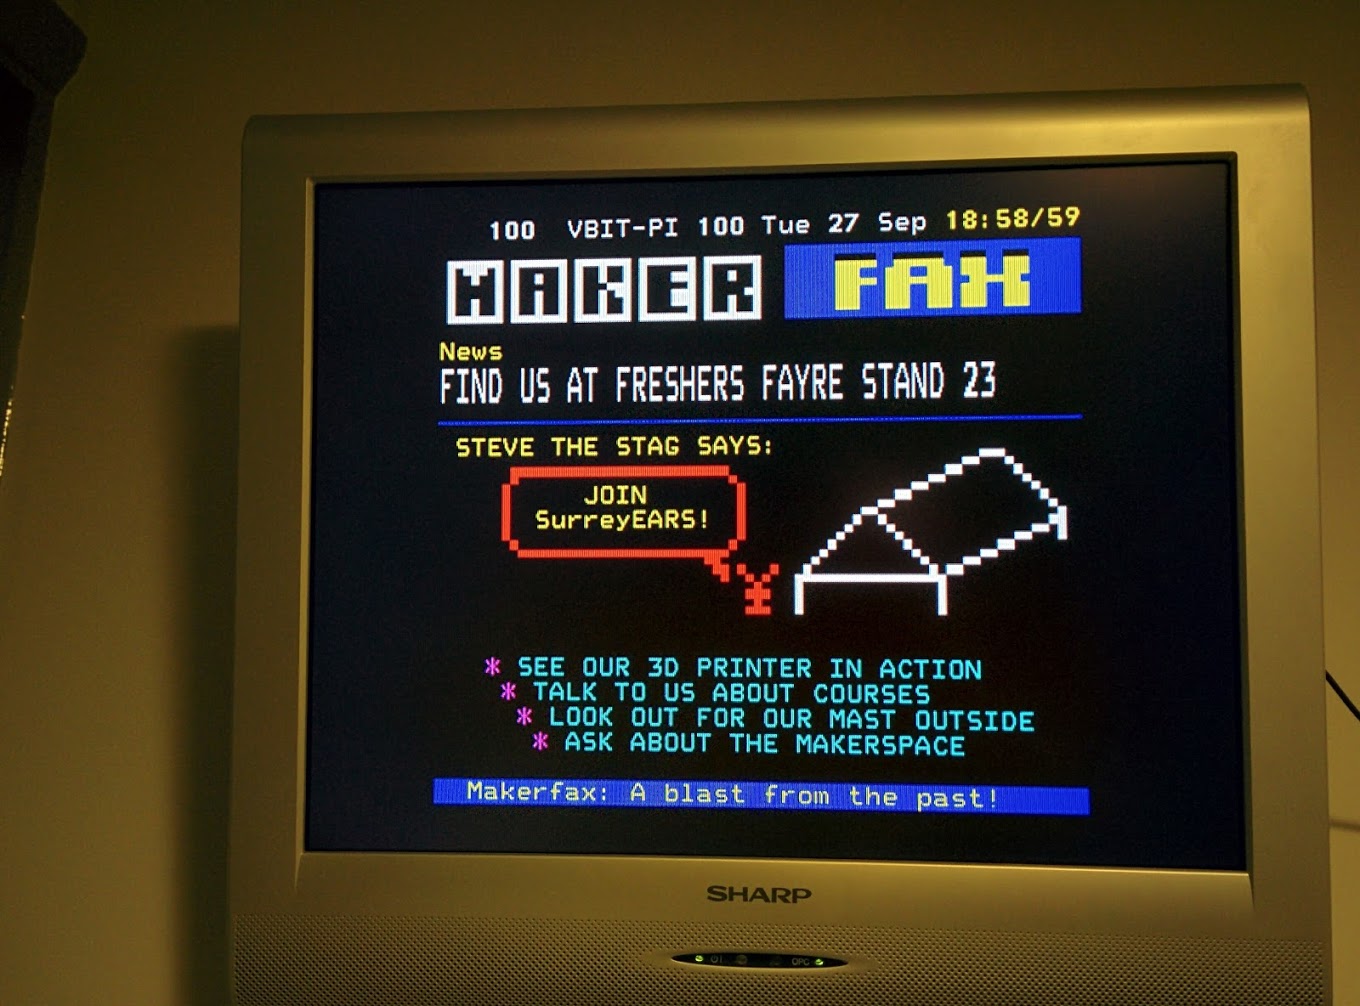 Functional CEEFAX copy made for university club.